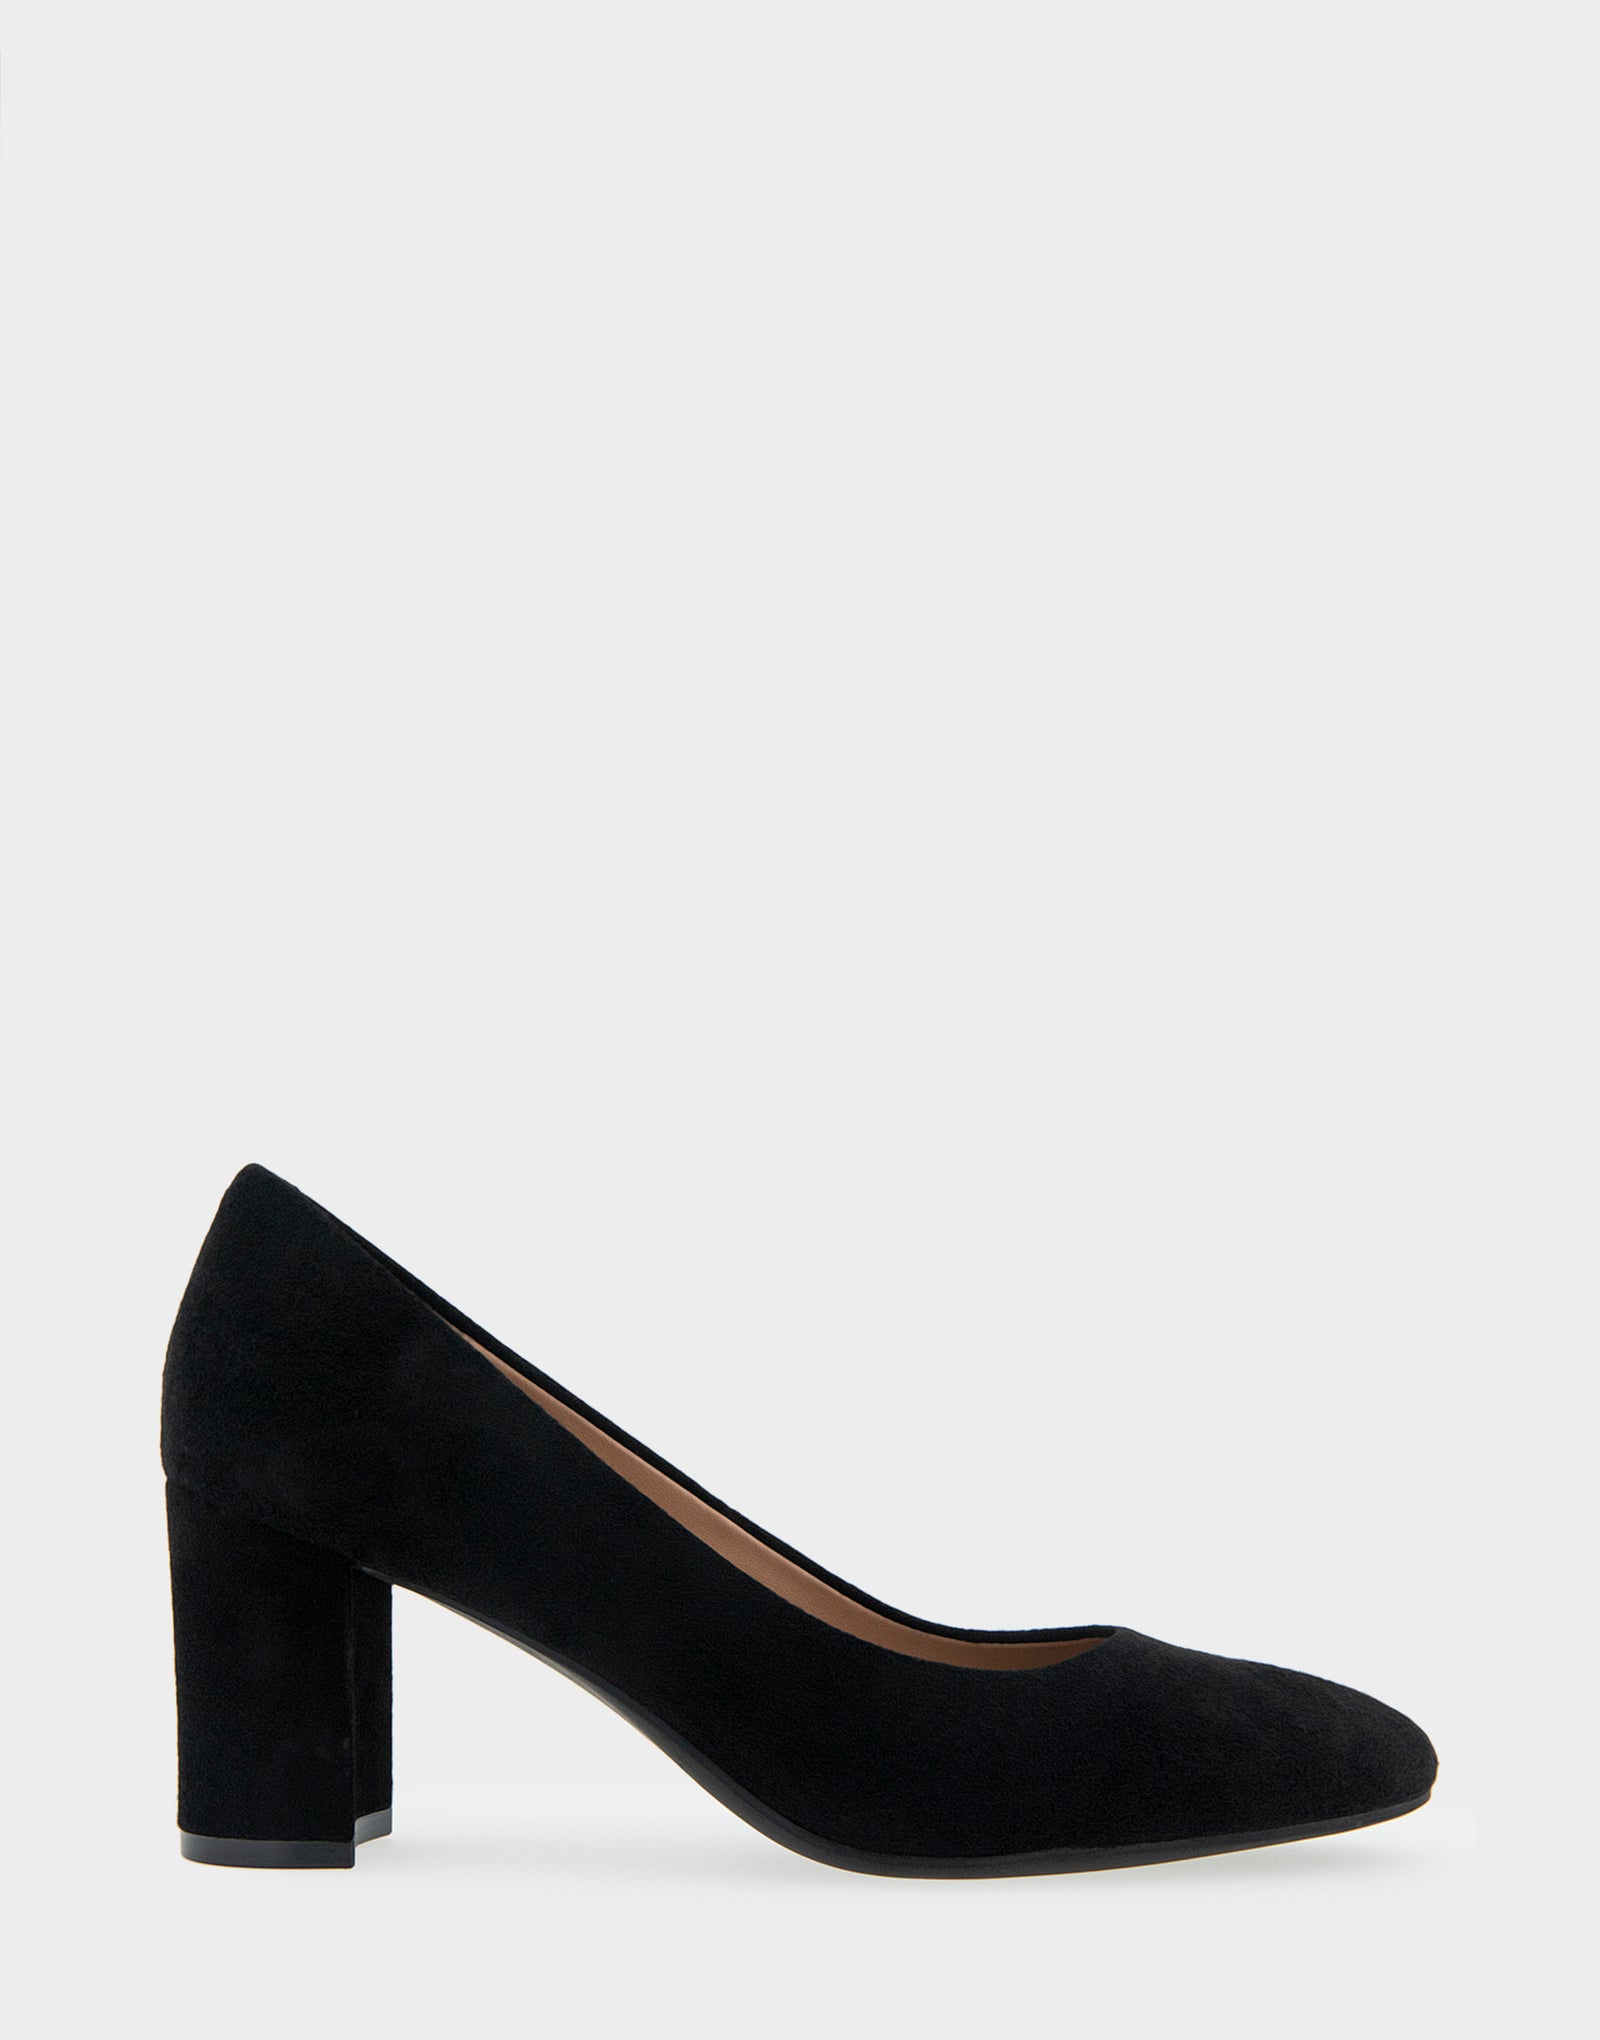 Found: The Best Black Pumps - Living in Yellow